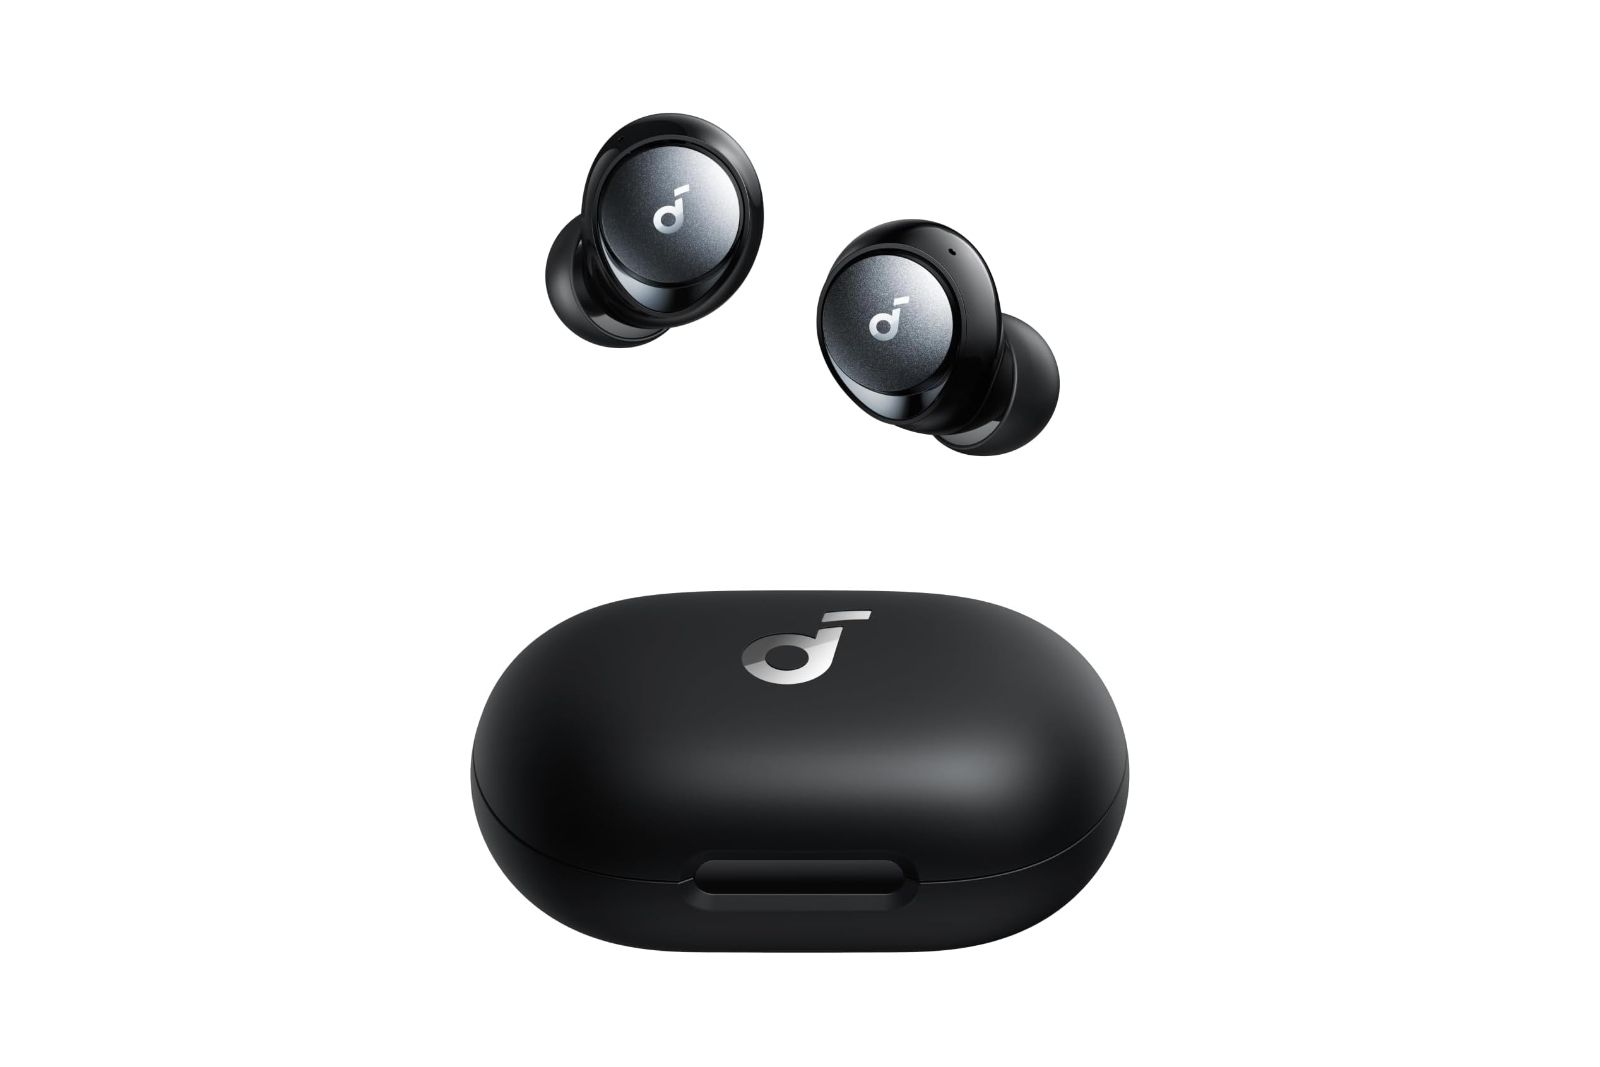 Black wireless earbuds floating over a black case.